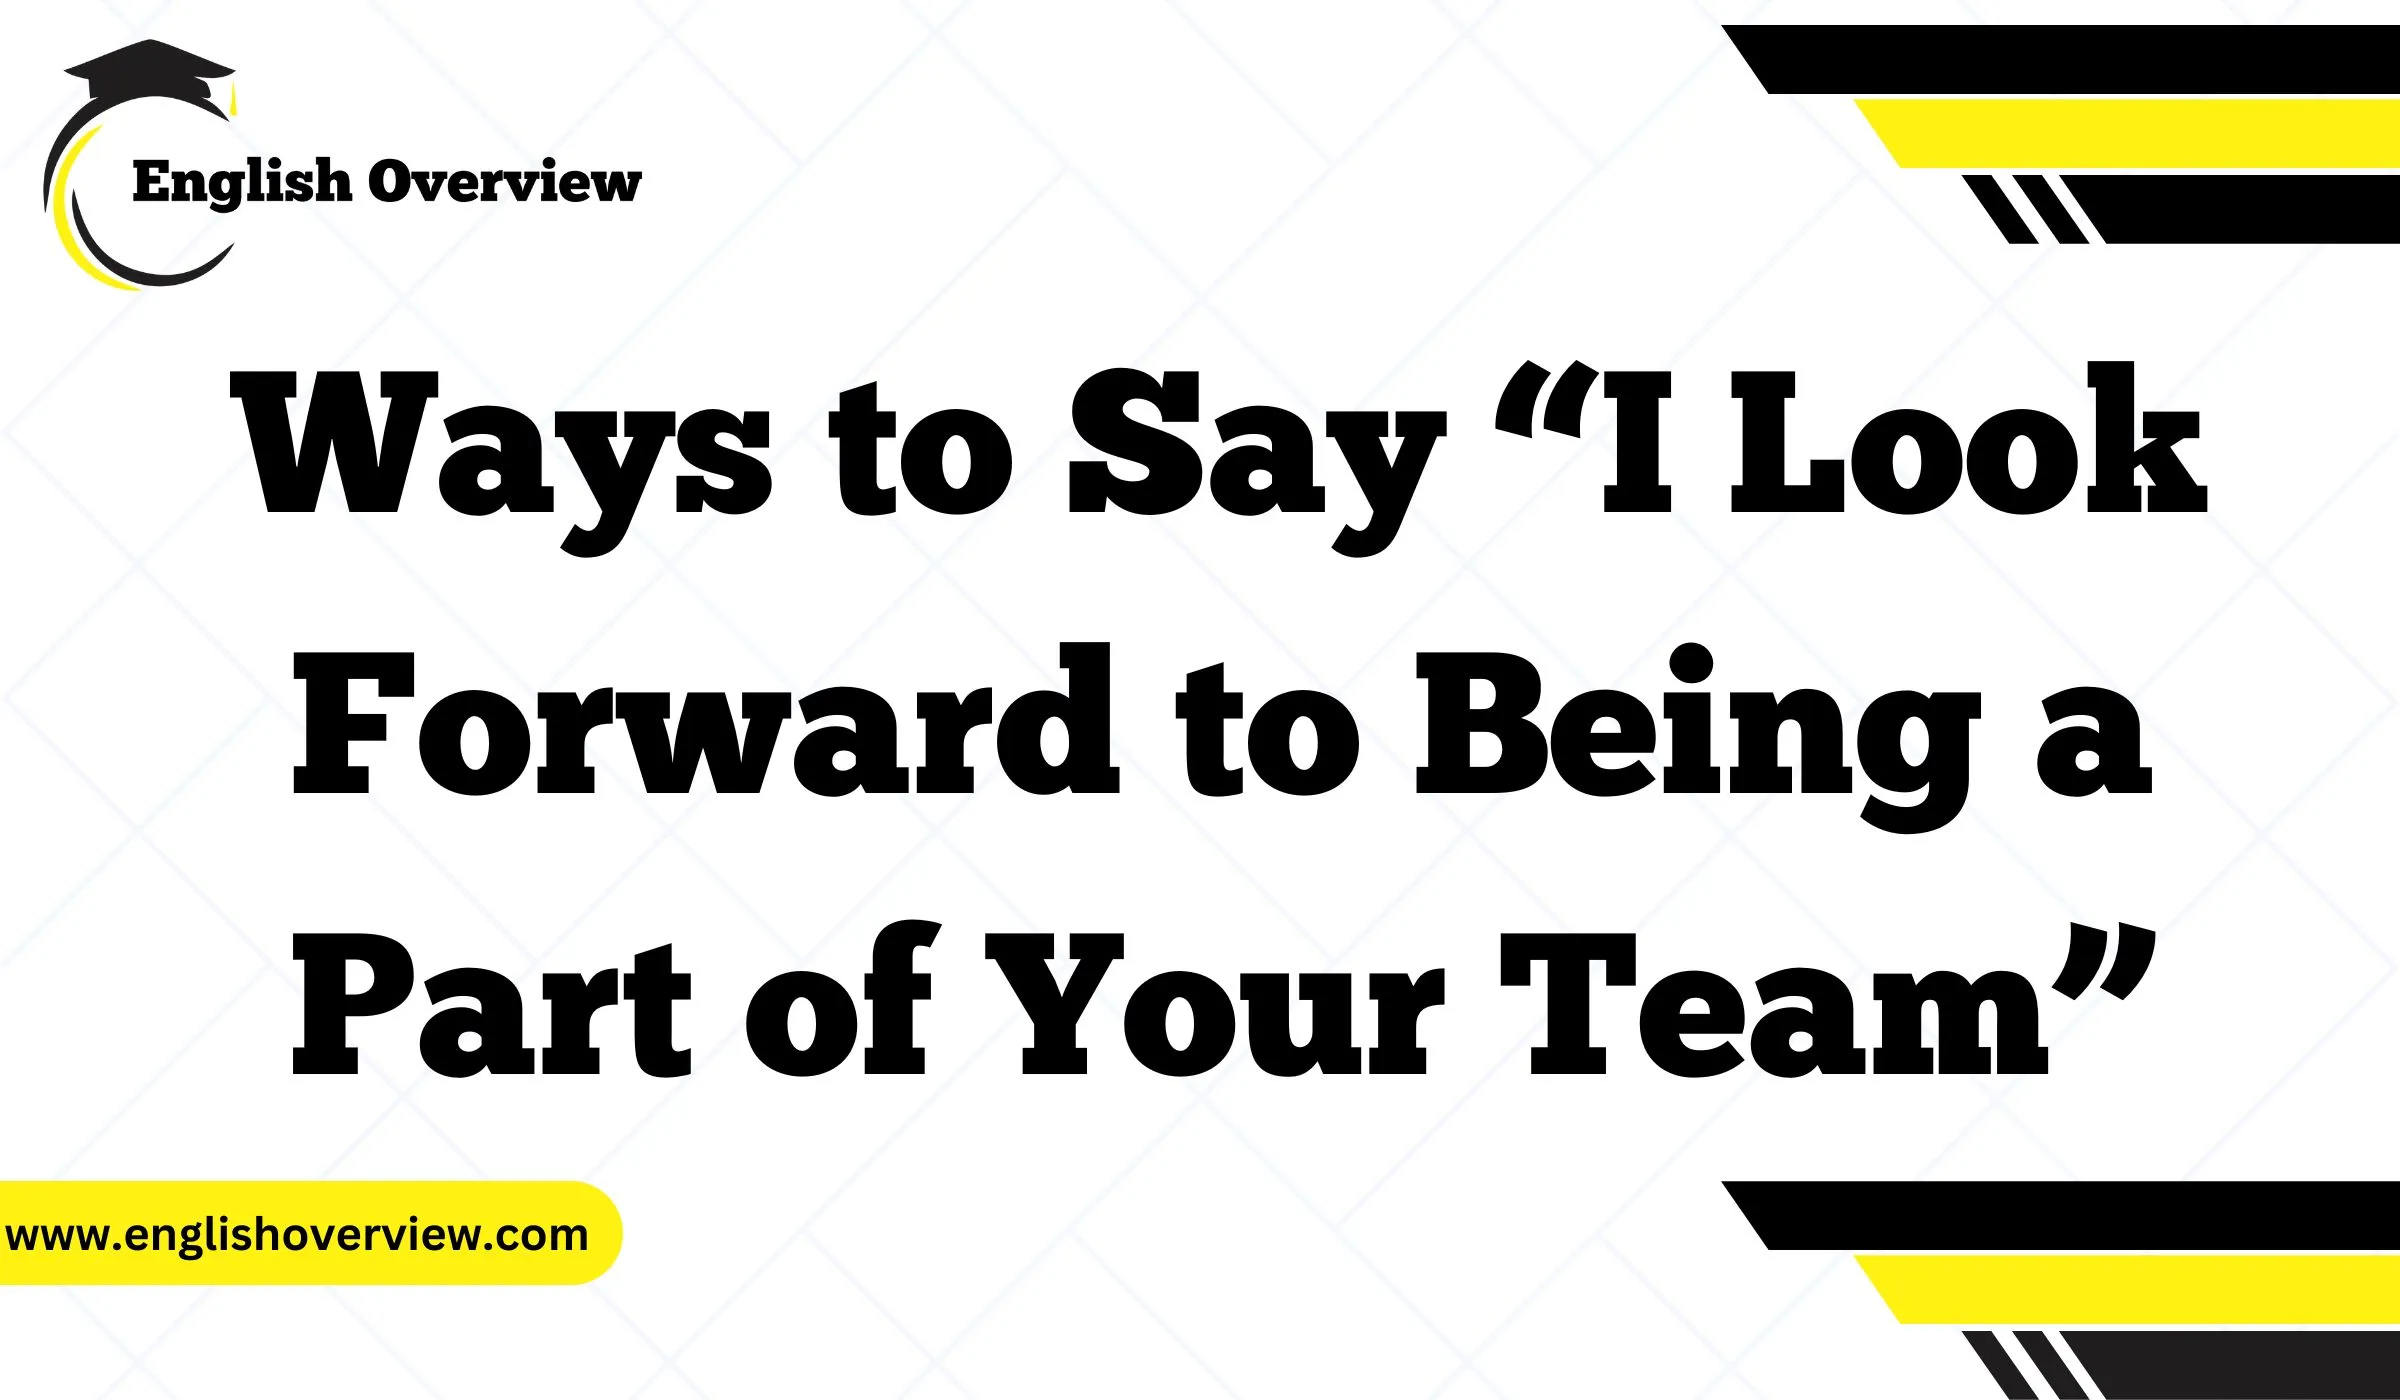 Ways to Say “I Look Forward to Being a Part of Your Team”